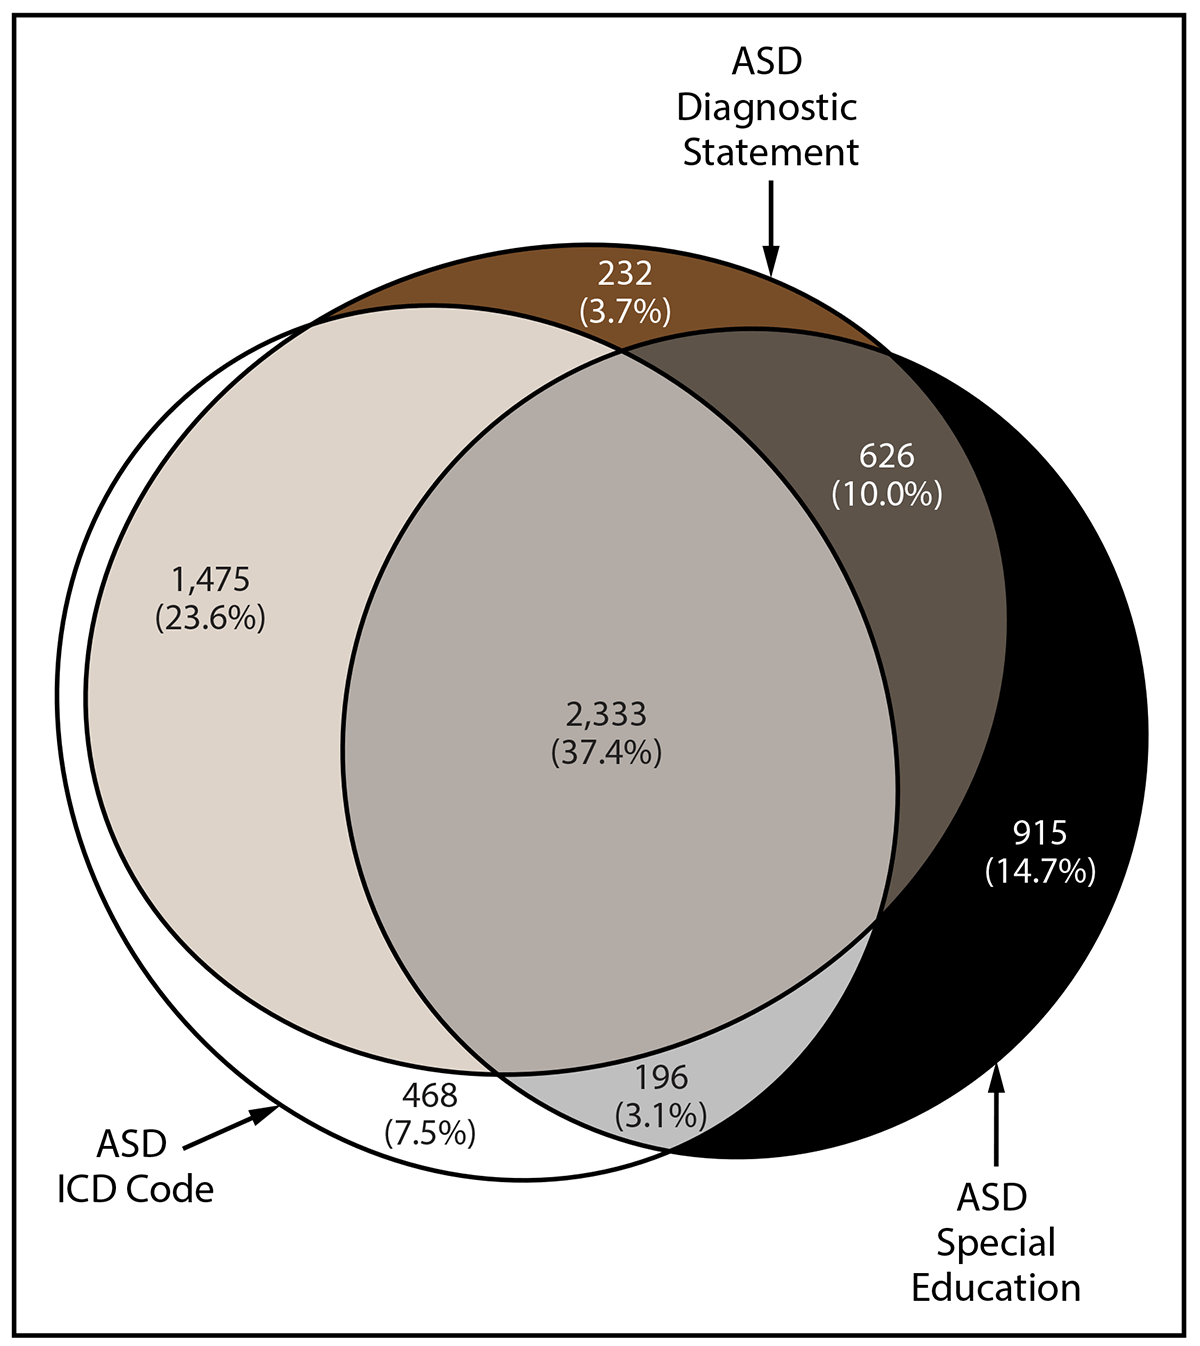 Figure is a Euler diagram and presents the overlap in different types of autism disorder identification among children aged 8 years in the 11 sites where the data were collected. Children met the ASD case definition if they received an International Classification of Diseases code, were diagnosed by a qualified health care professional, or a special education classification.